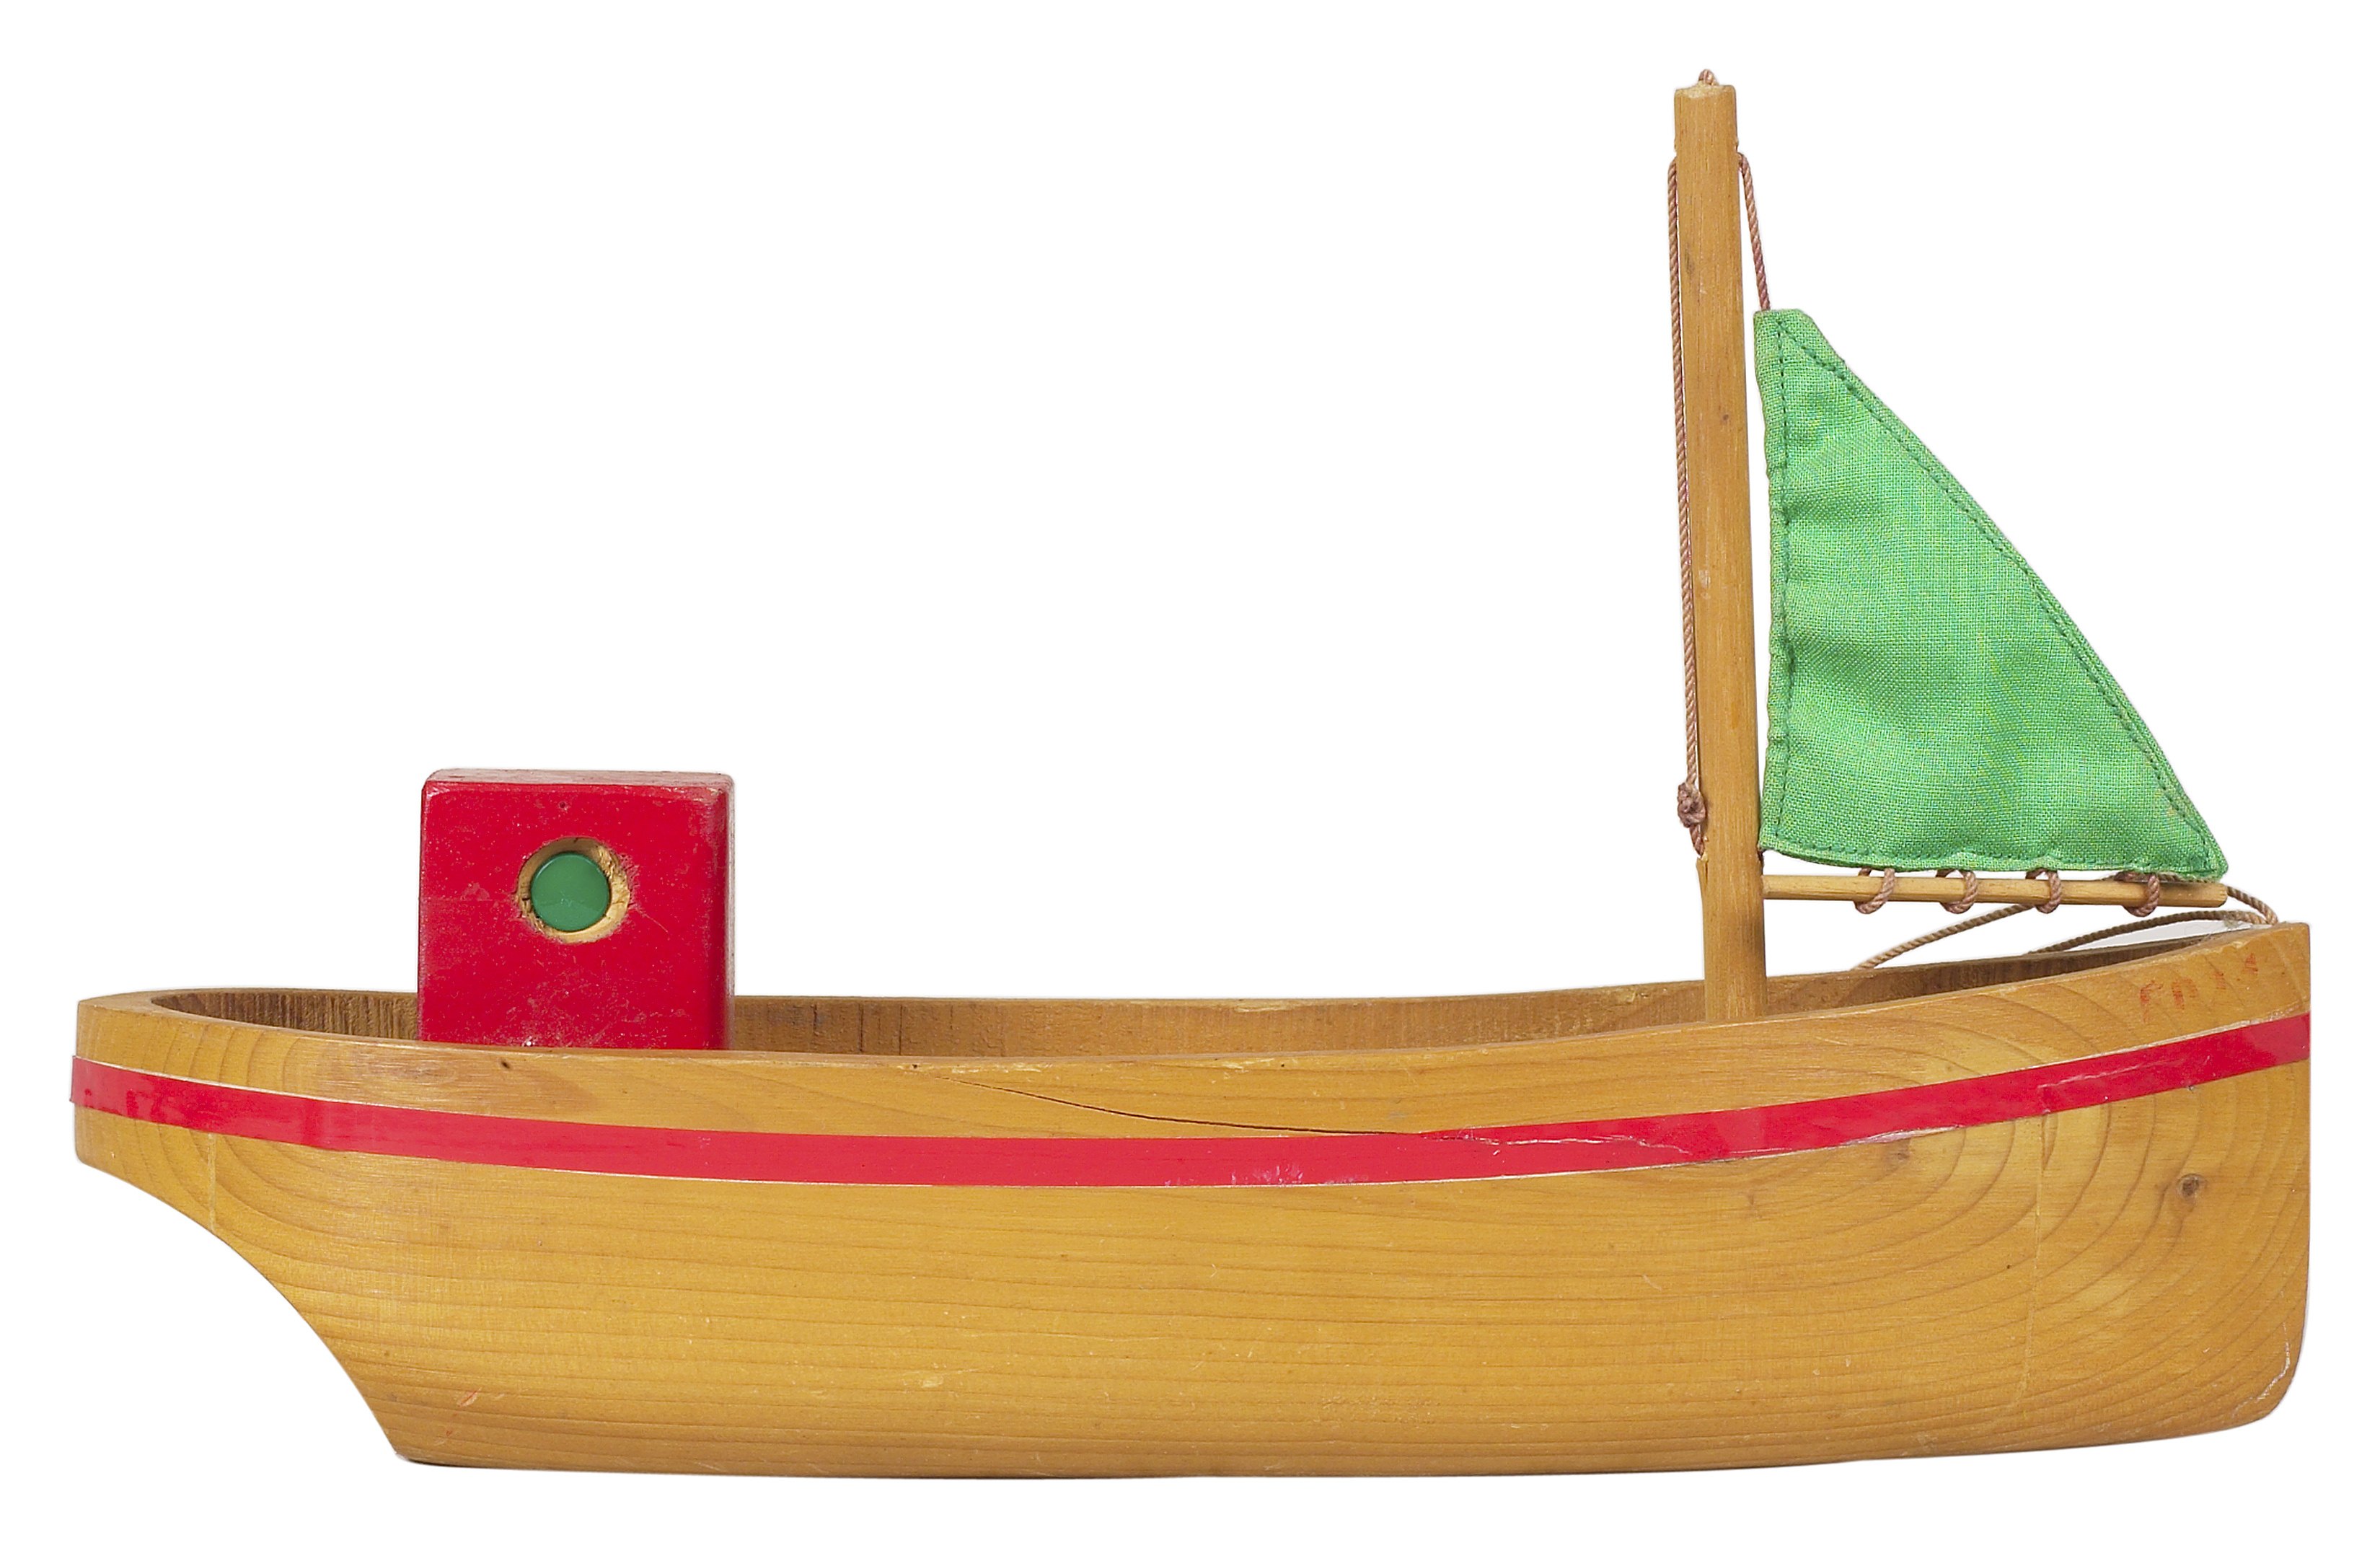 How to Make a Wooden Toy Boat | eHow